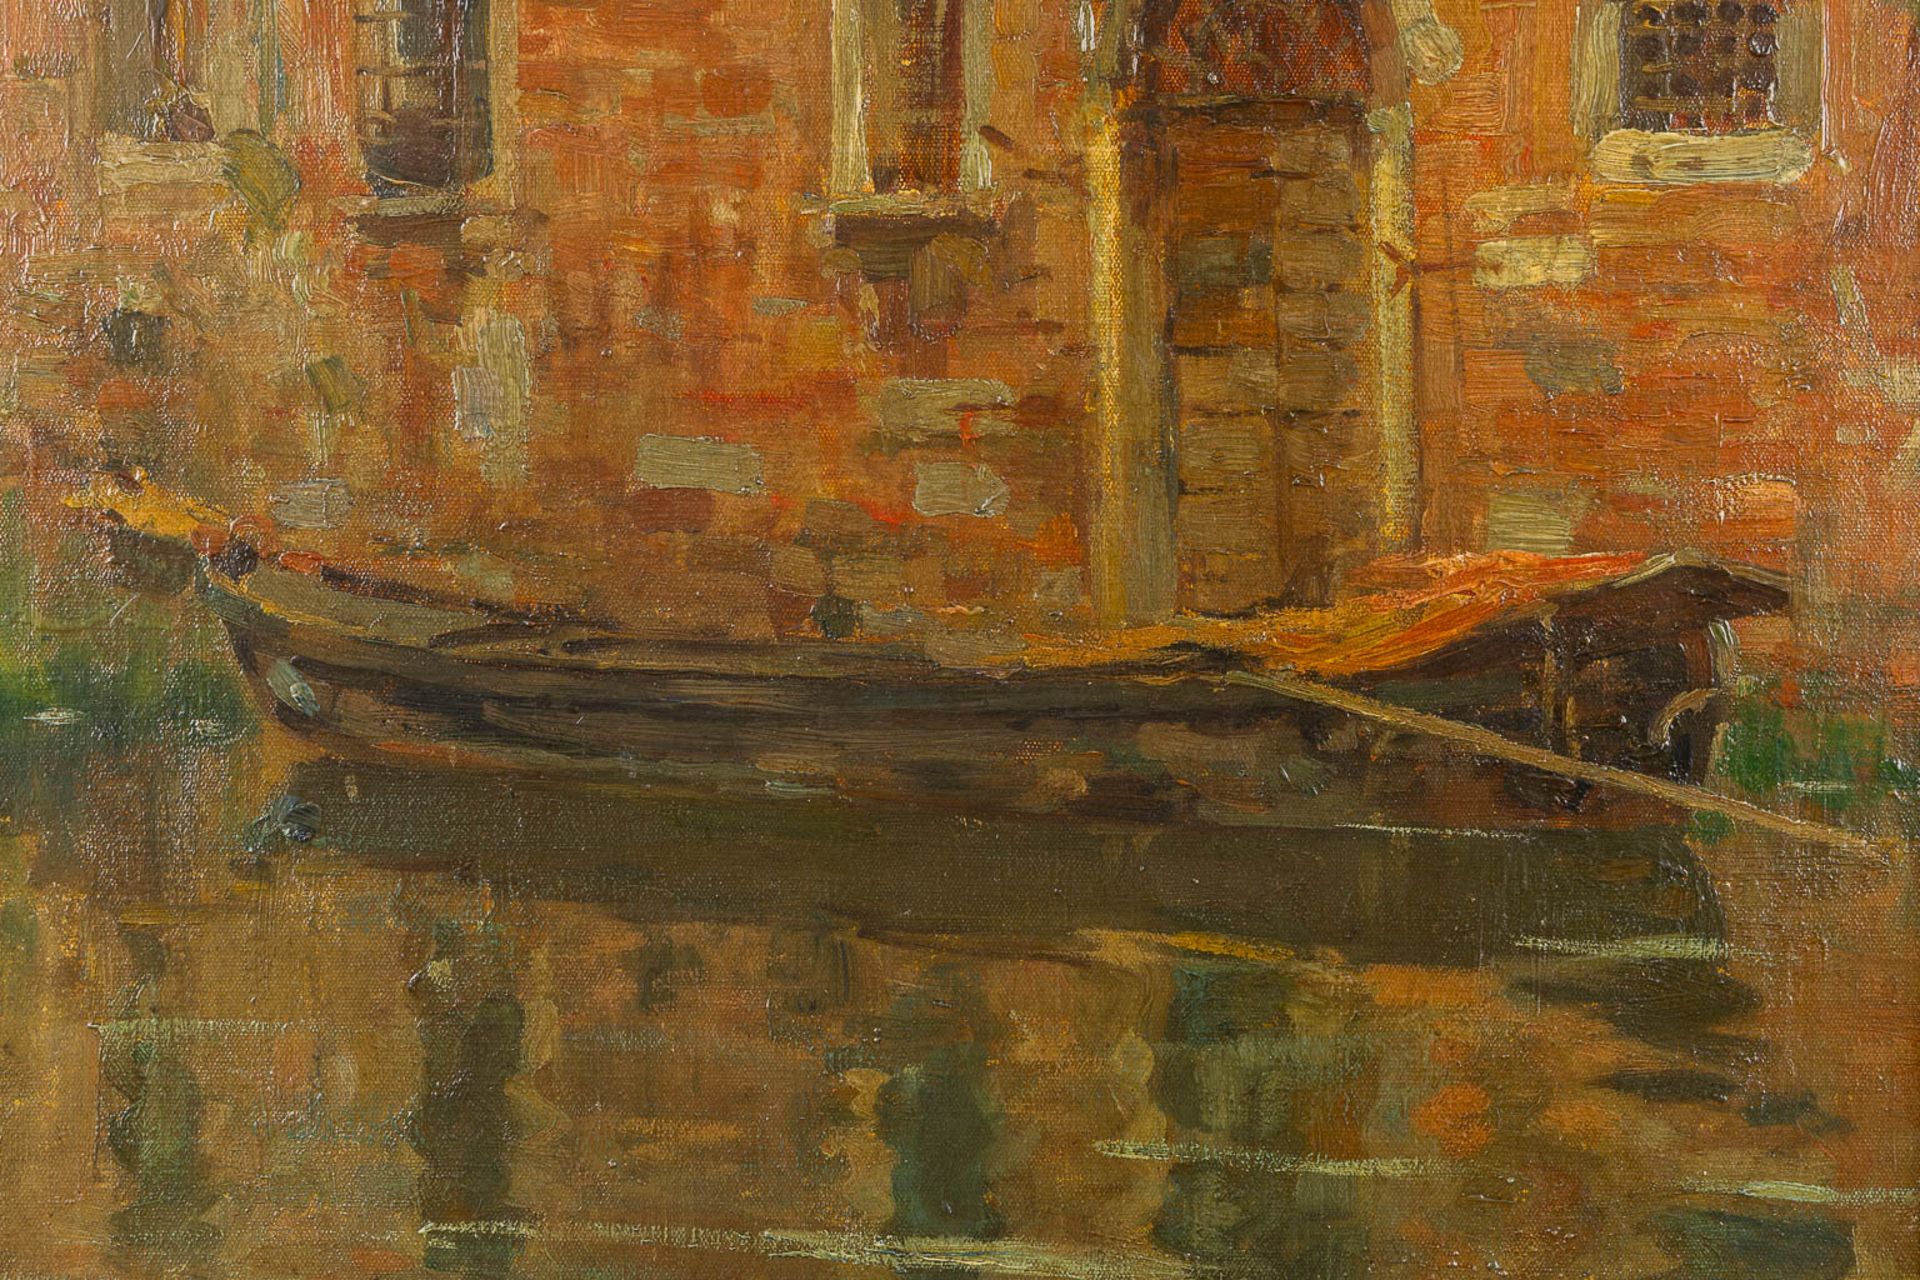 Isidore OPSOMER (1878-1967) 'Ship in the canal' oil on canvas. (W:50 x H:65 cm) - Image 4 of 6